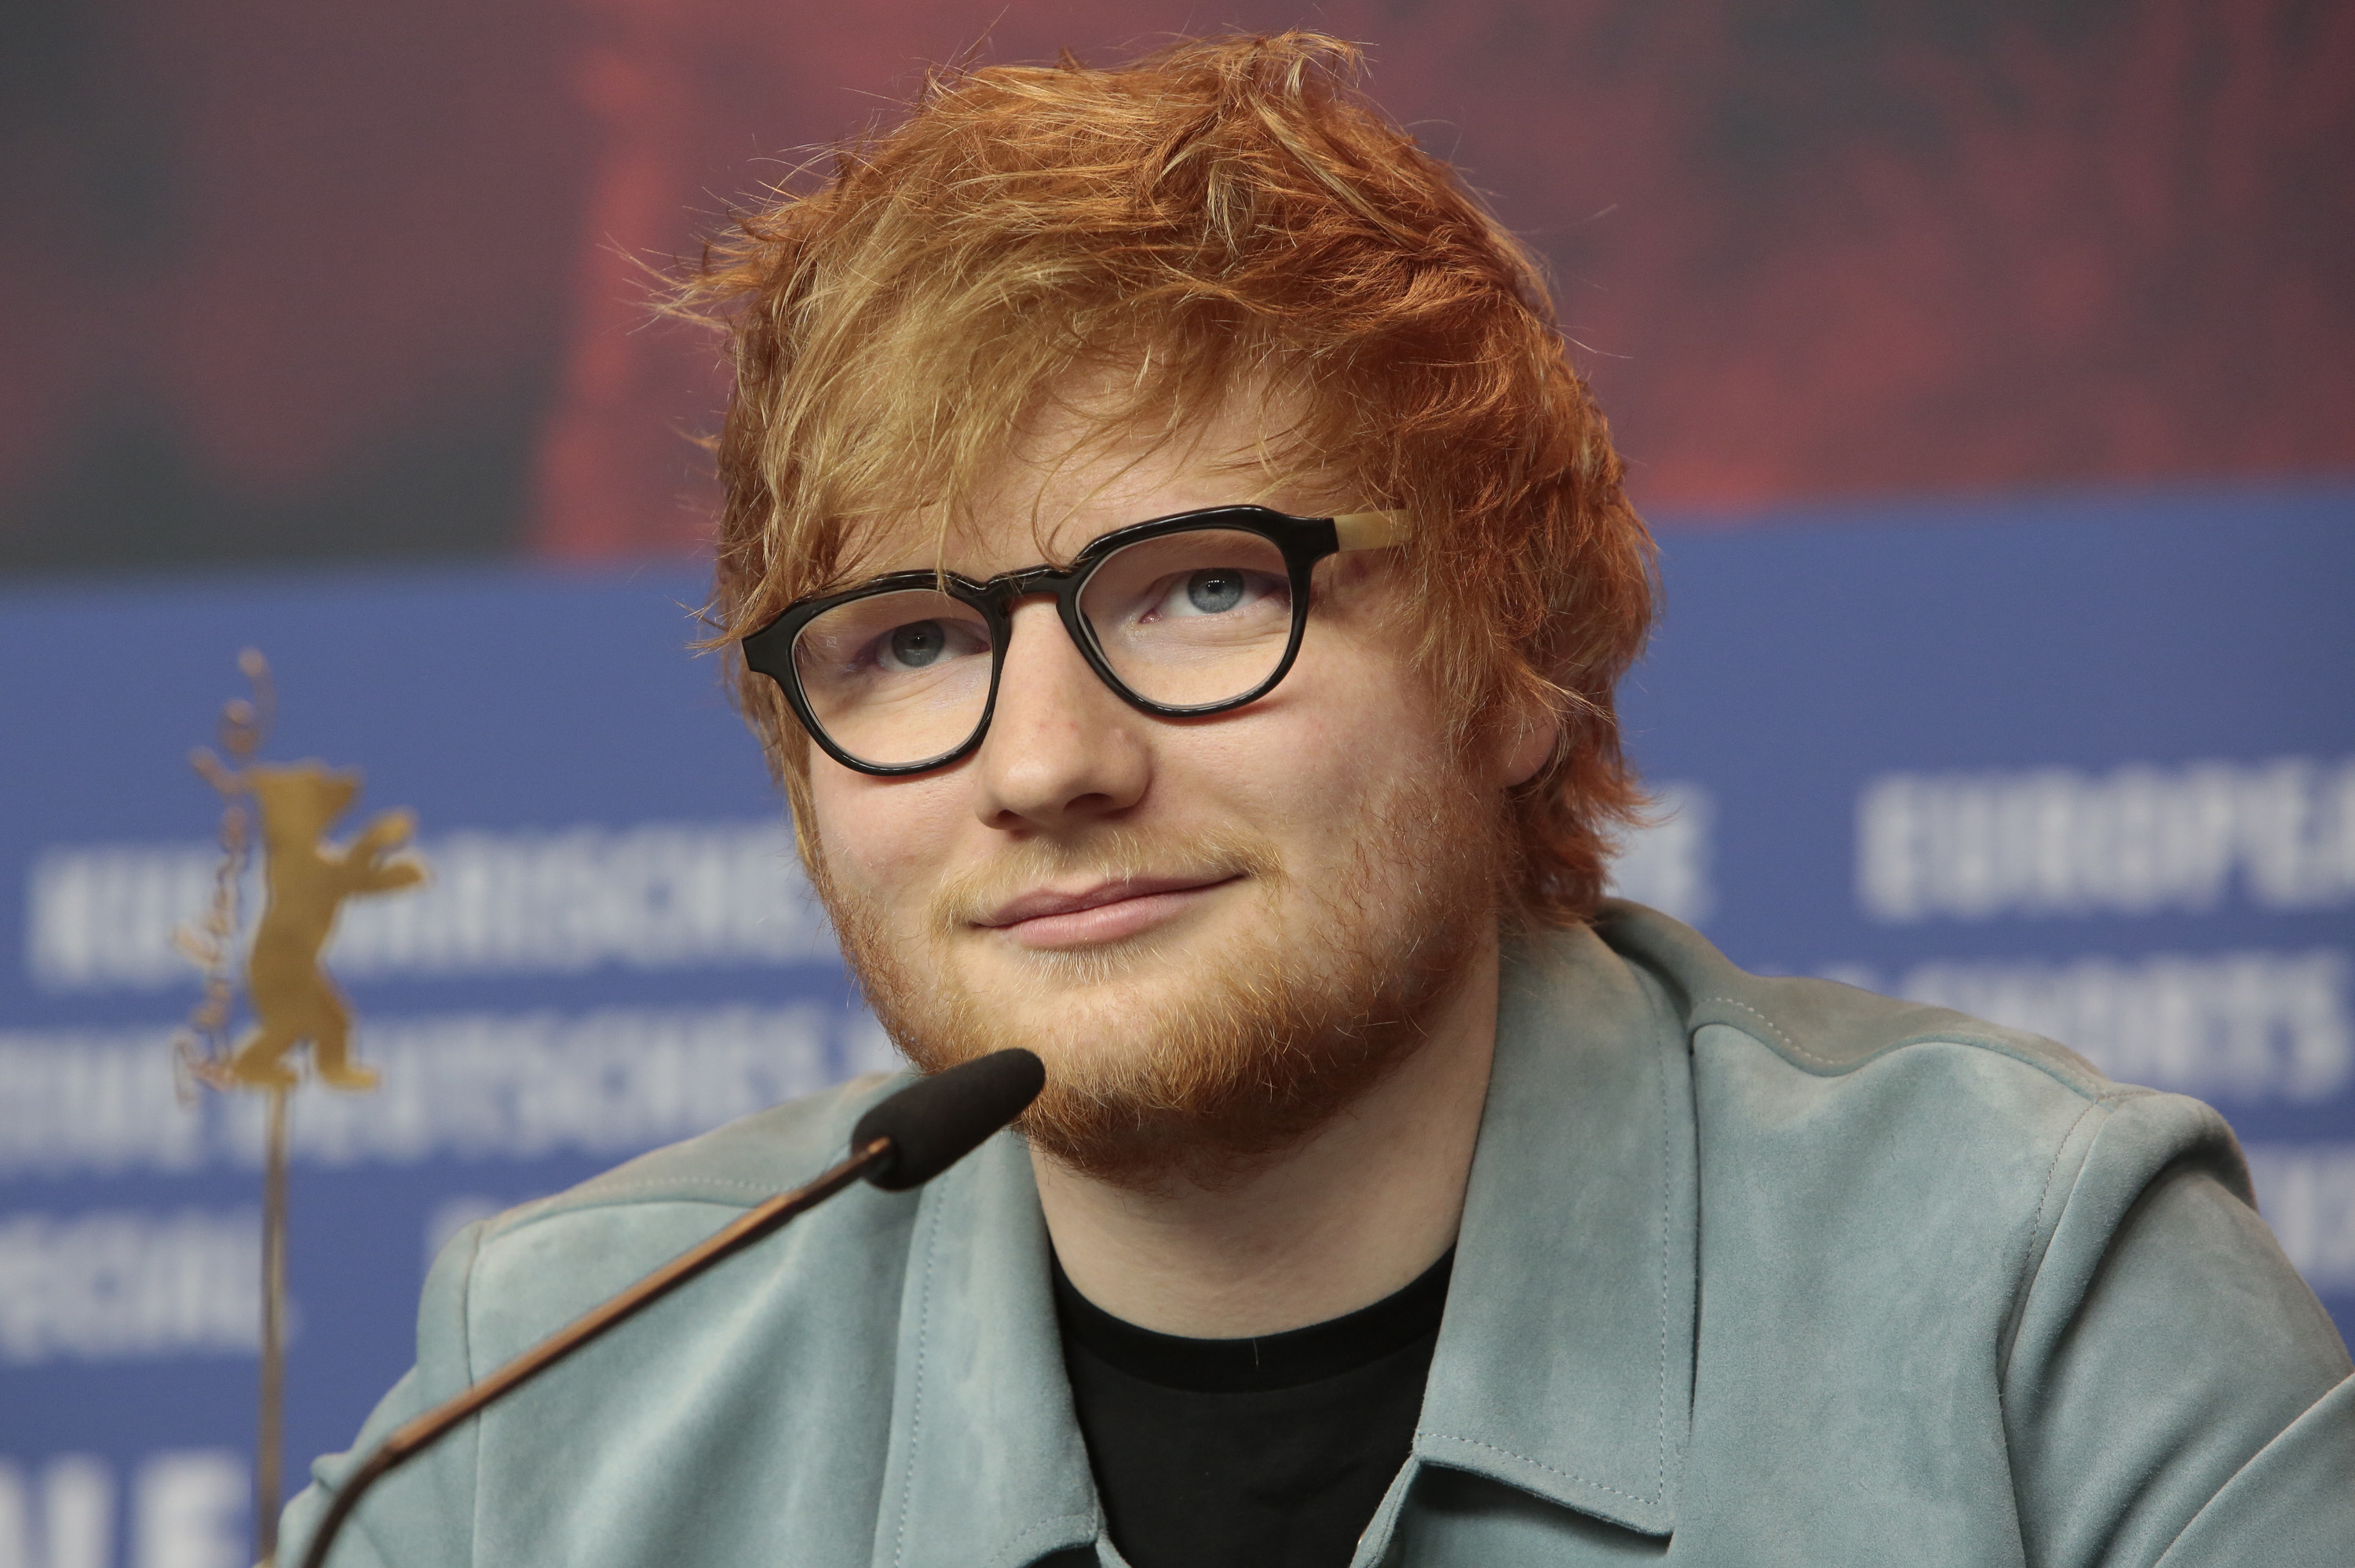 Ed Sheeran is photographed during a press conference